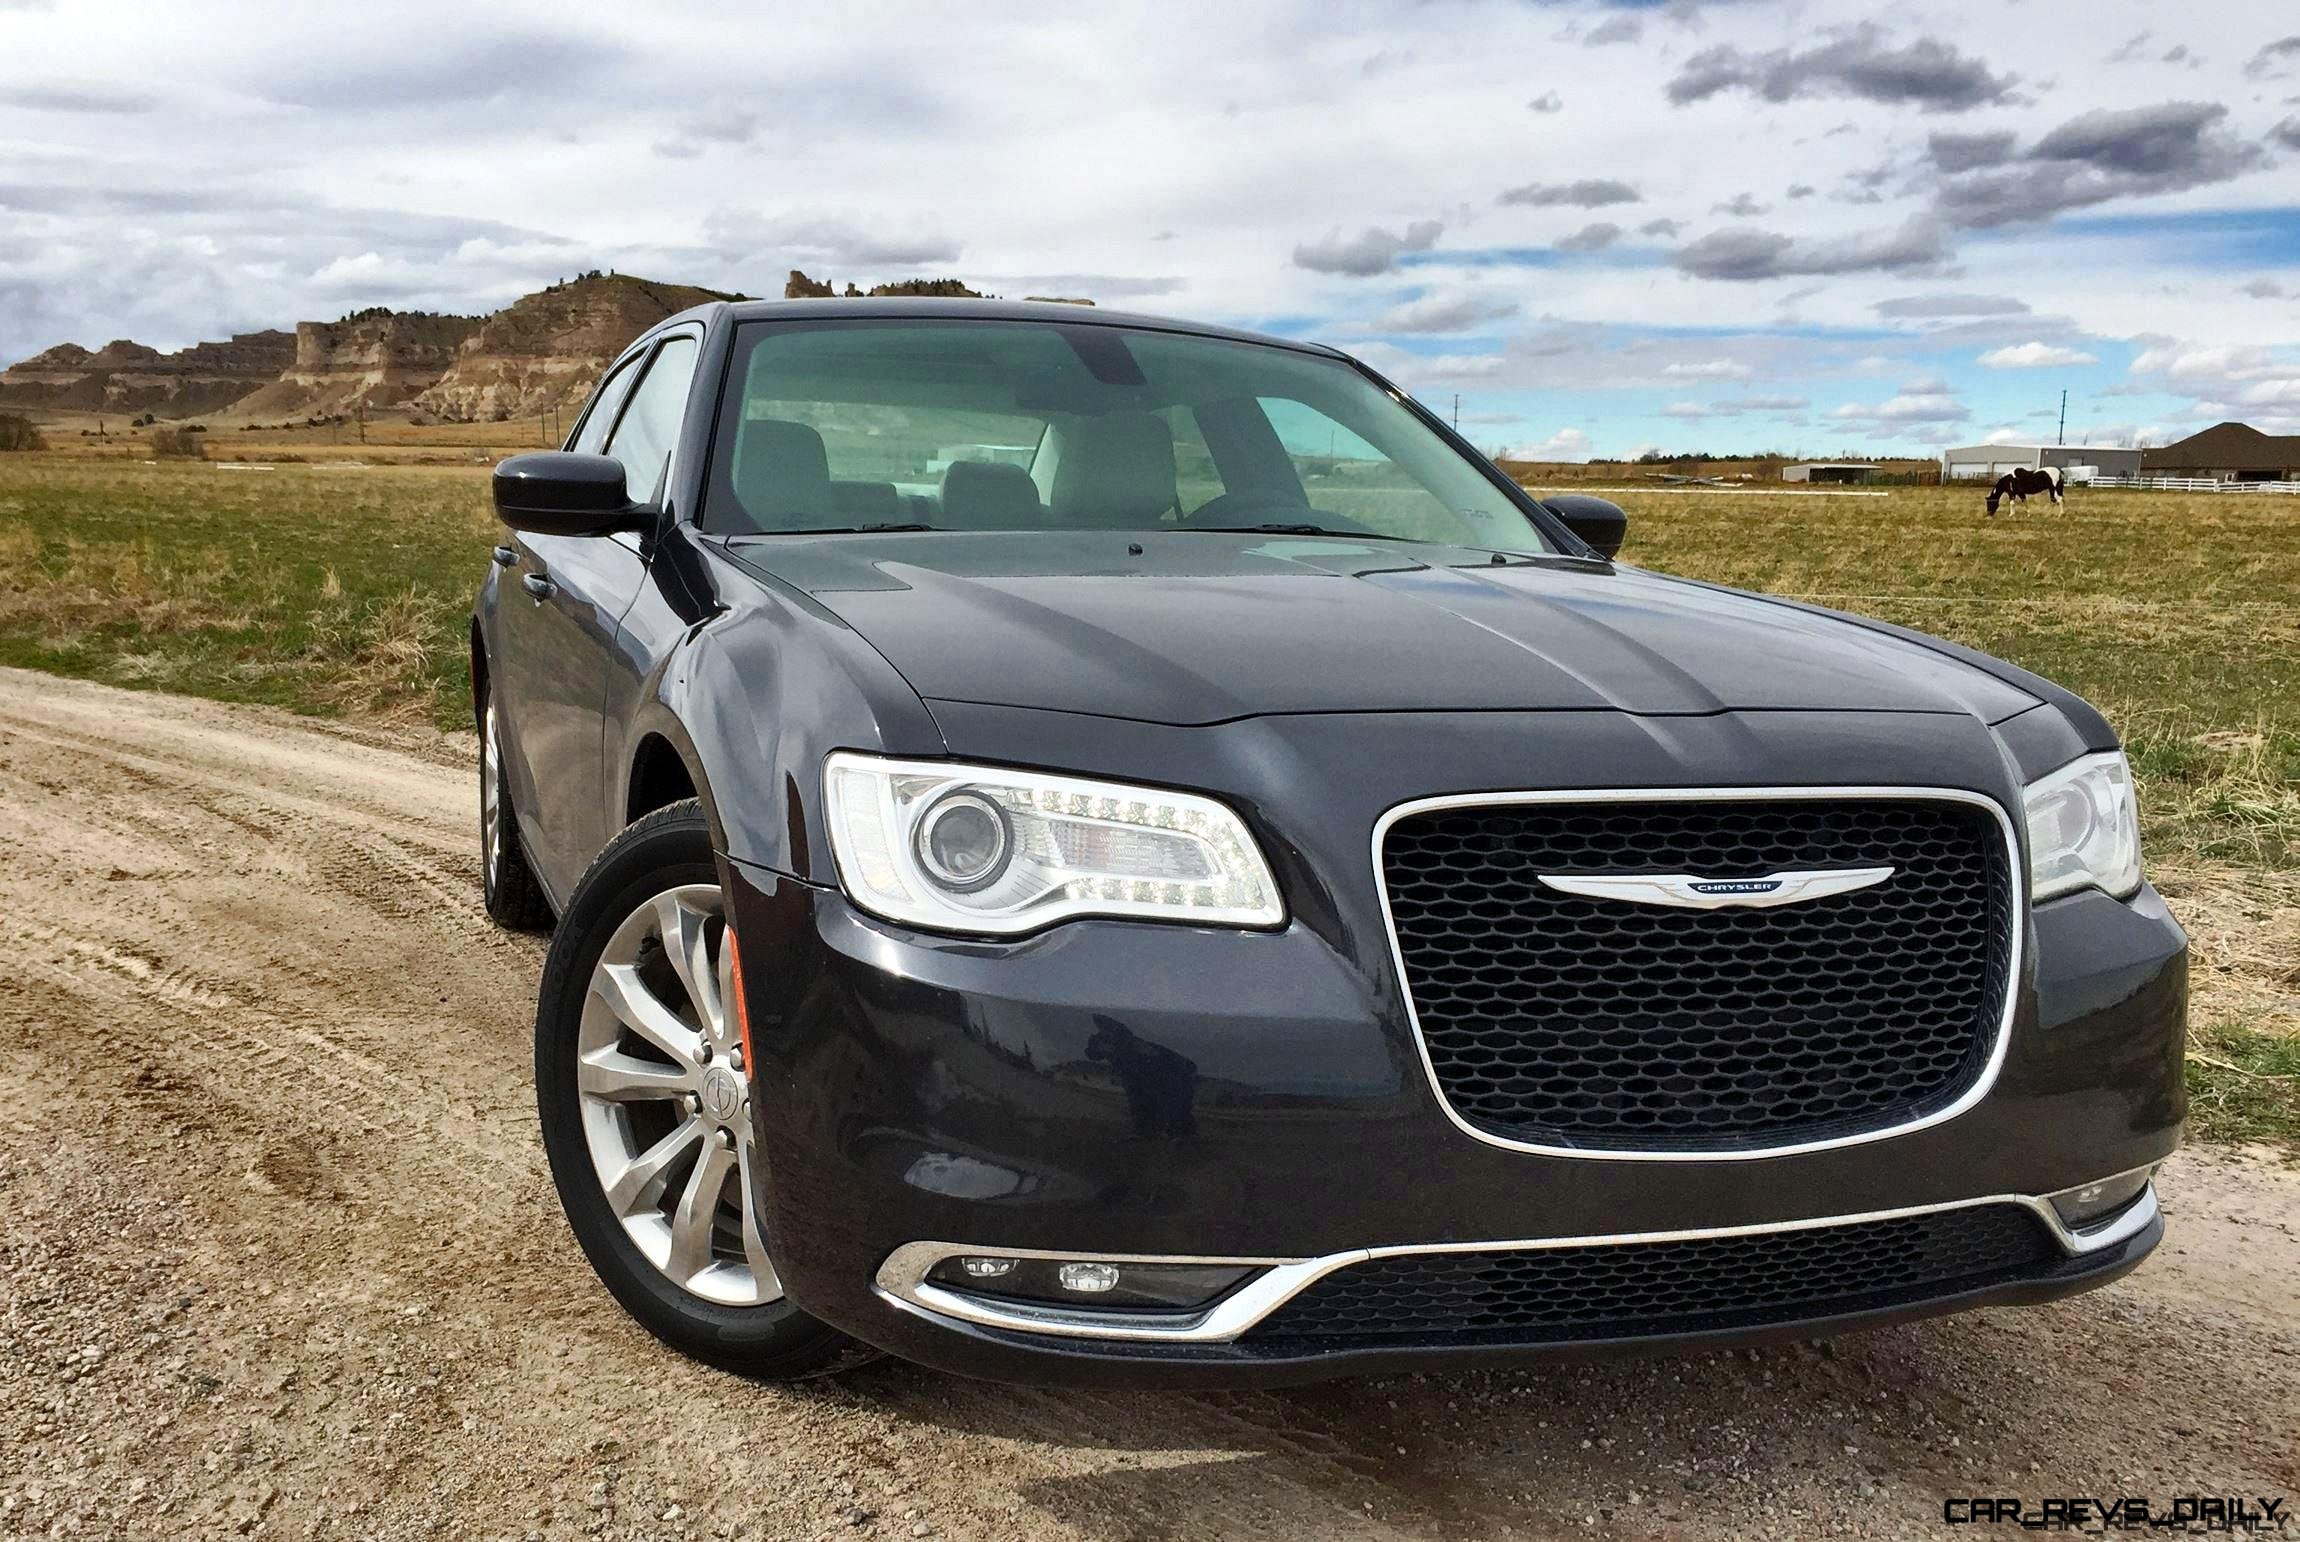 Road Test Review - 2016 Chrysler 300 Limited - By Tim Esterdahl »  Car-Revs-Daily.com